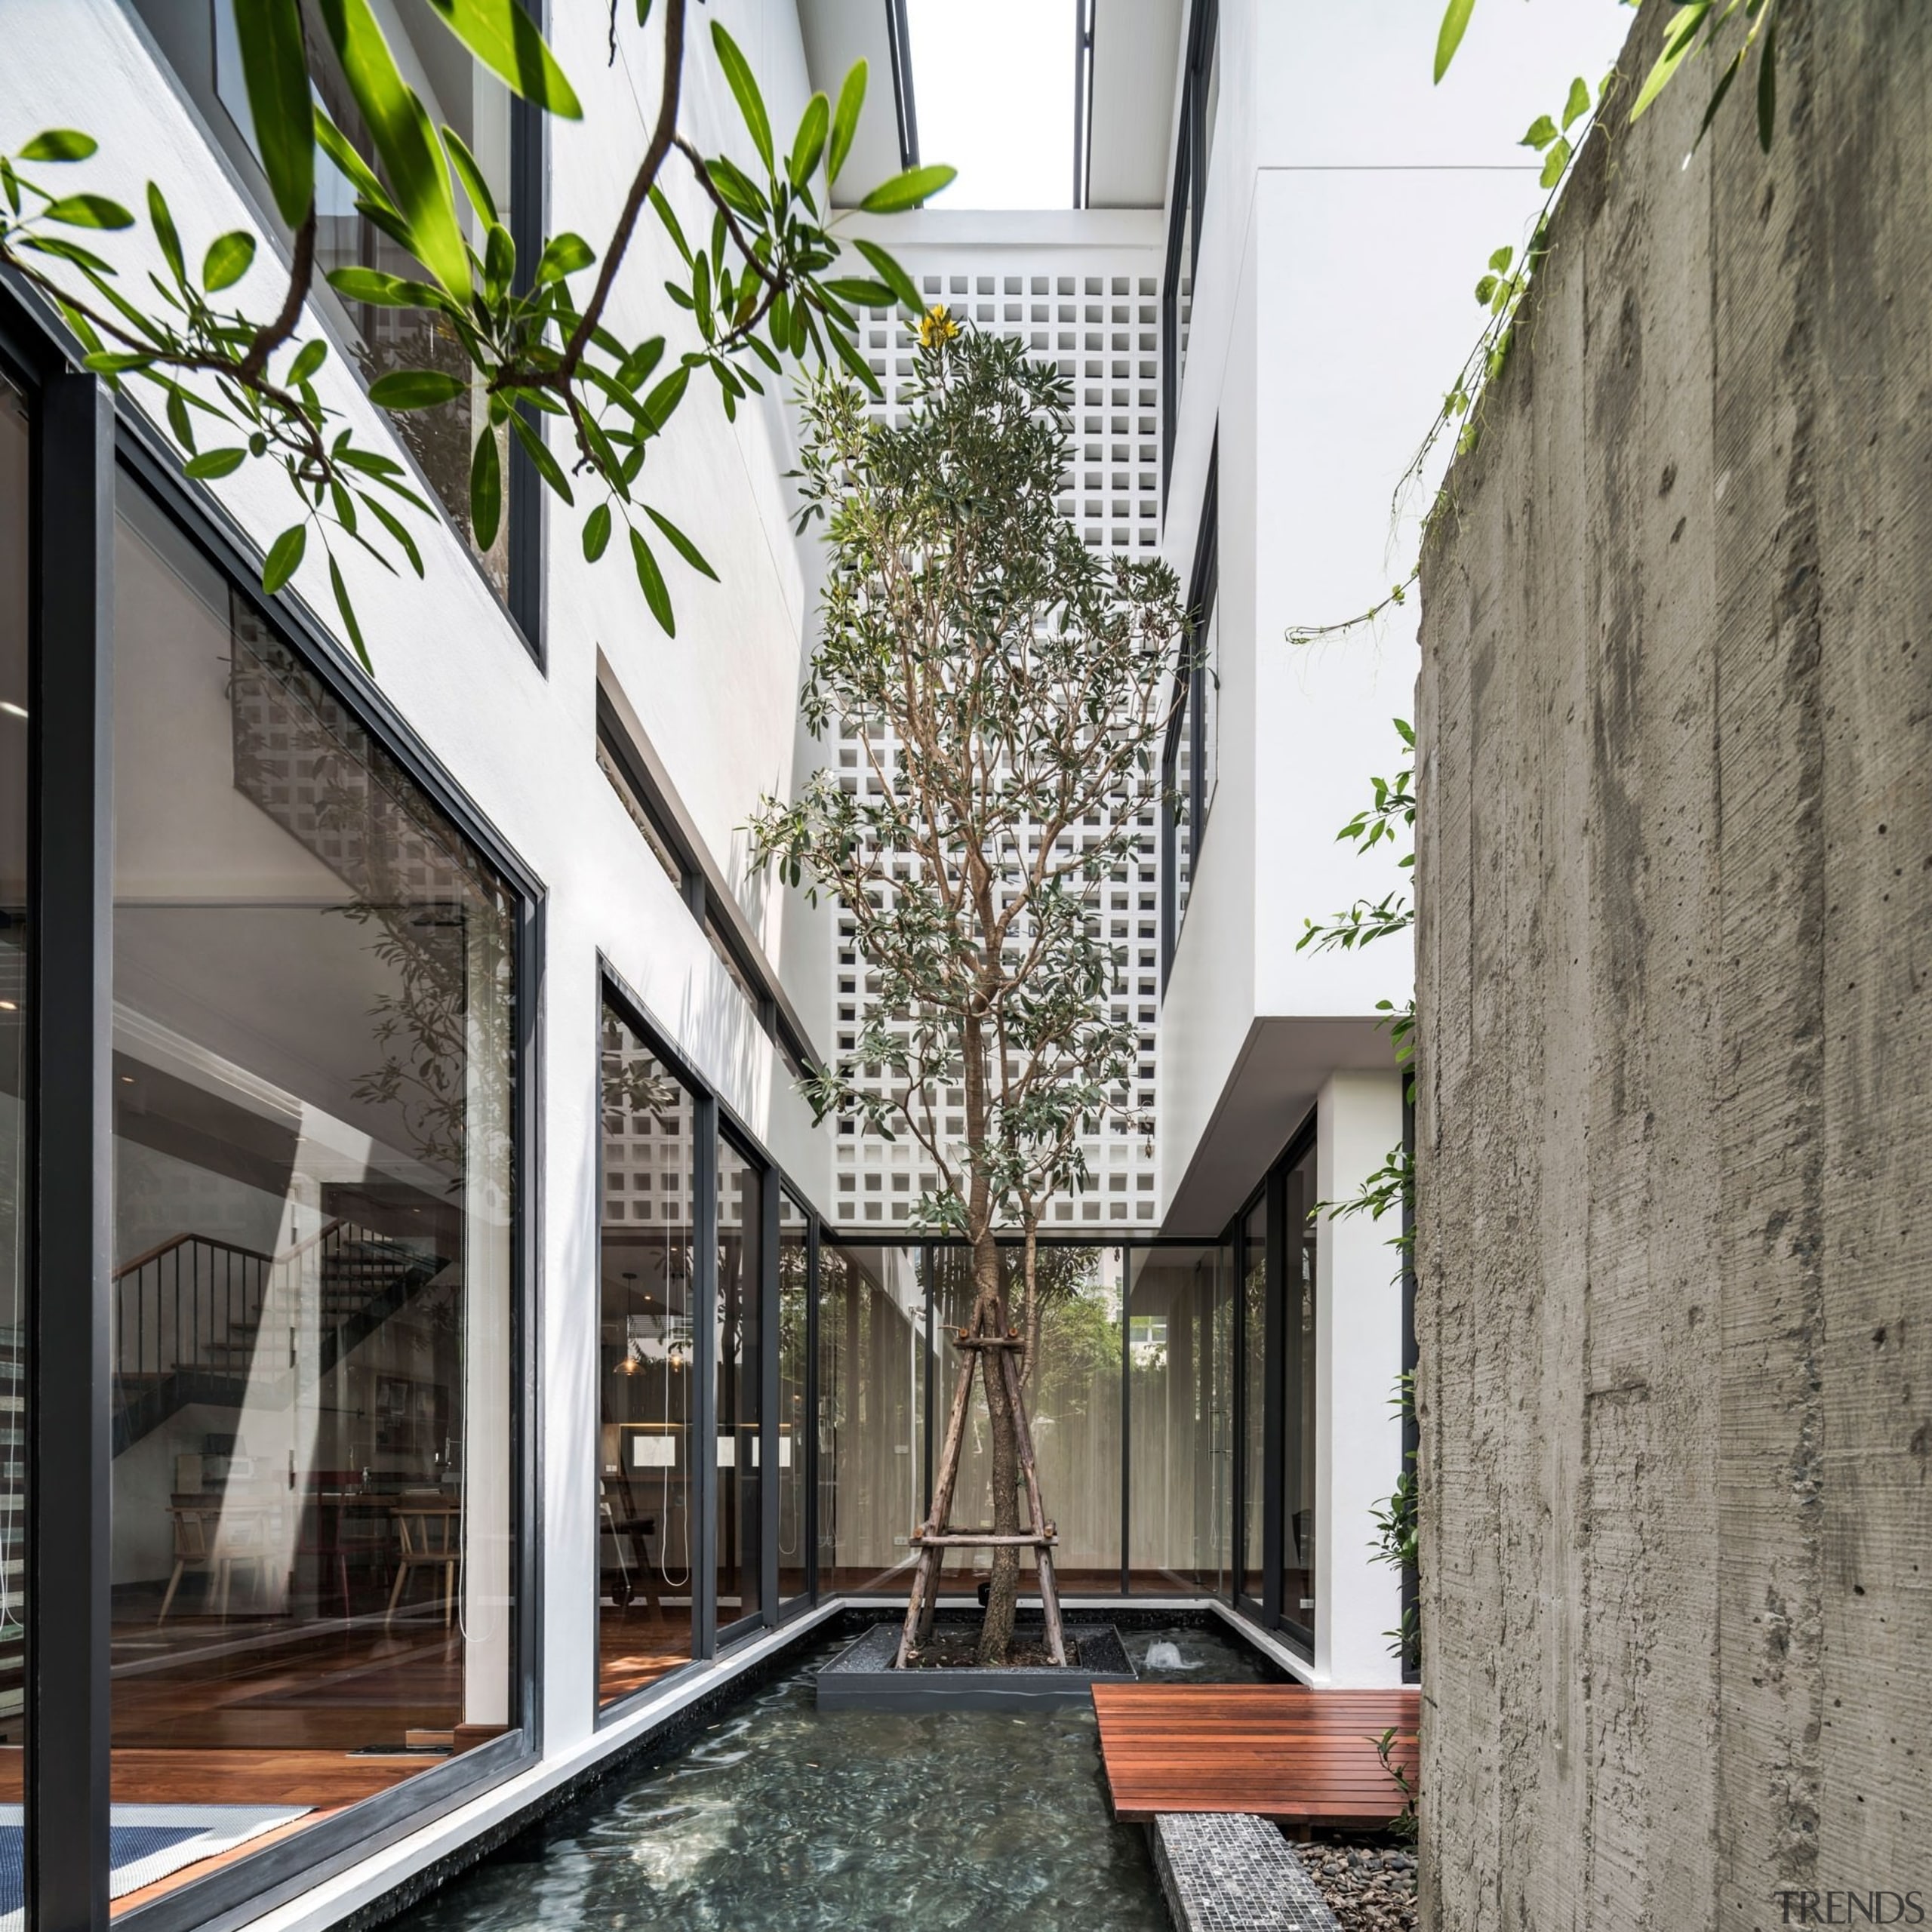 Another view of the open space within the architecture, building, condominium, courtyard, facade, house, property, real estate, residential area, gray, white